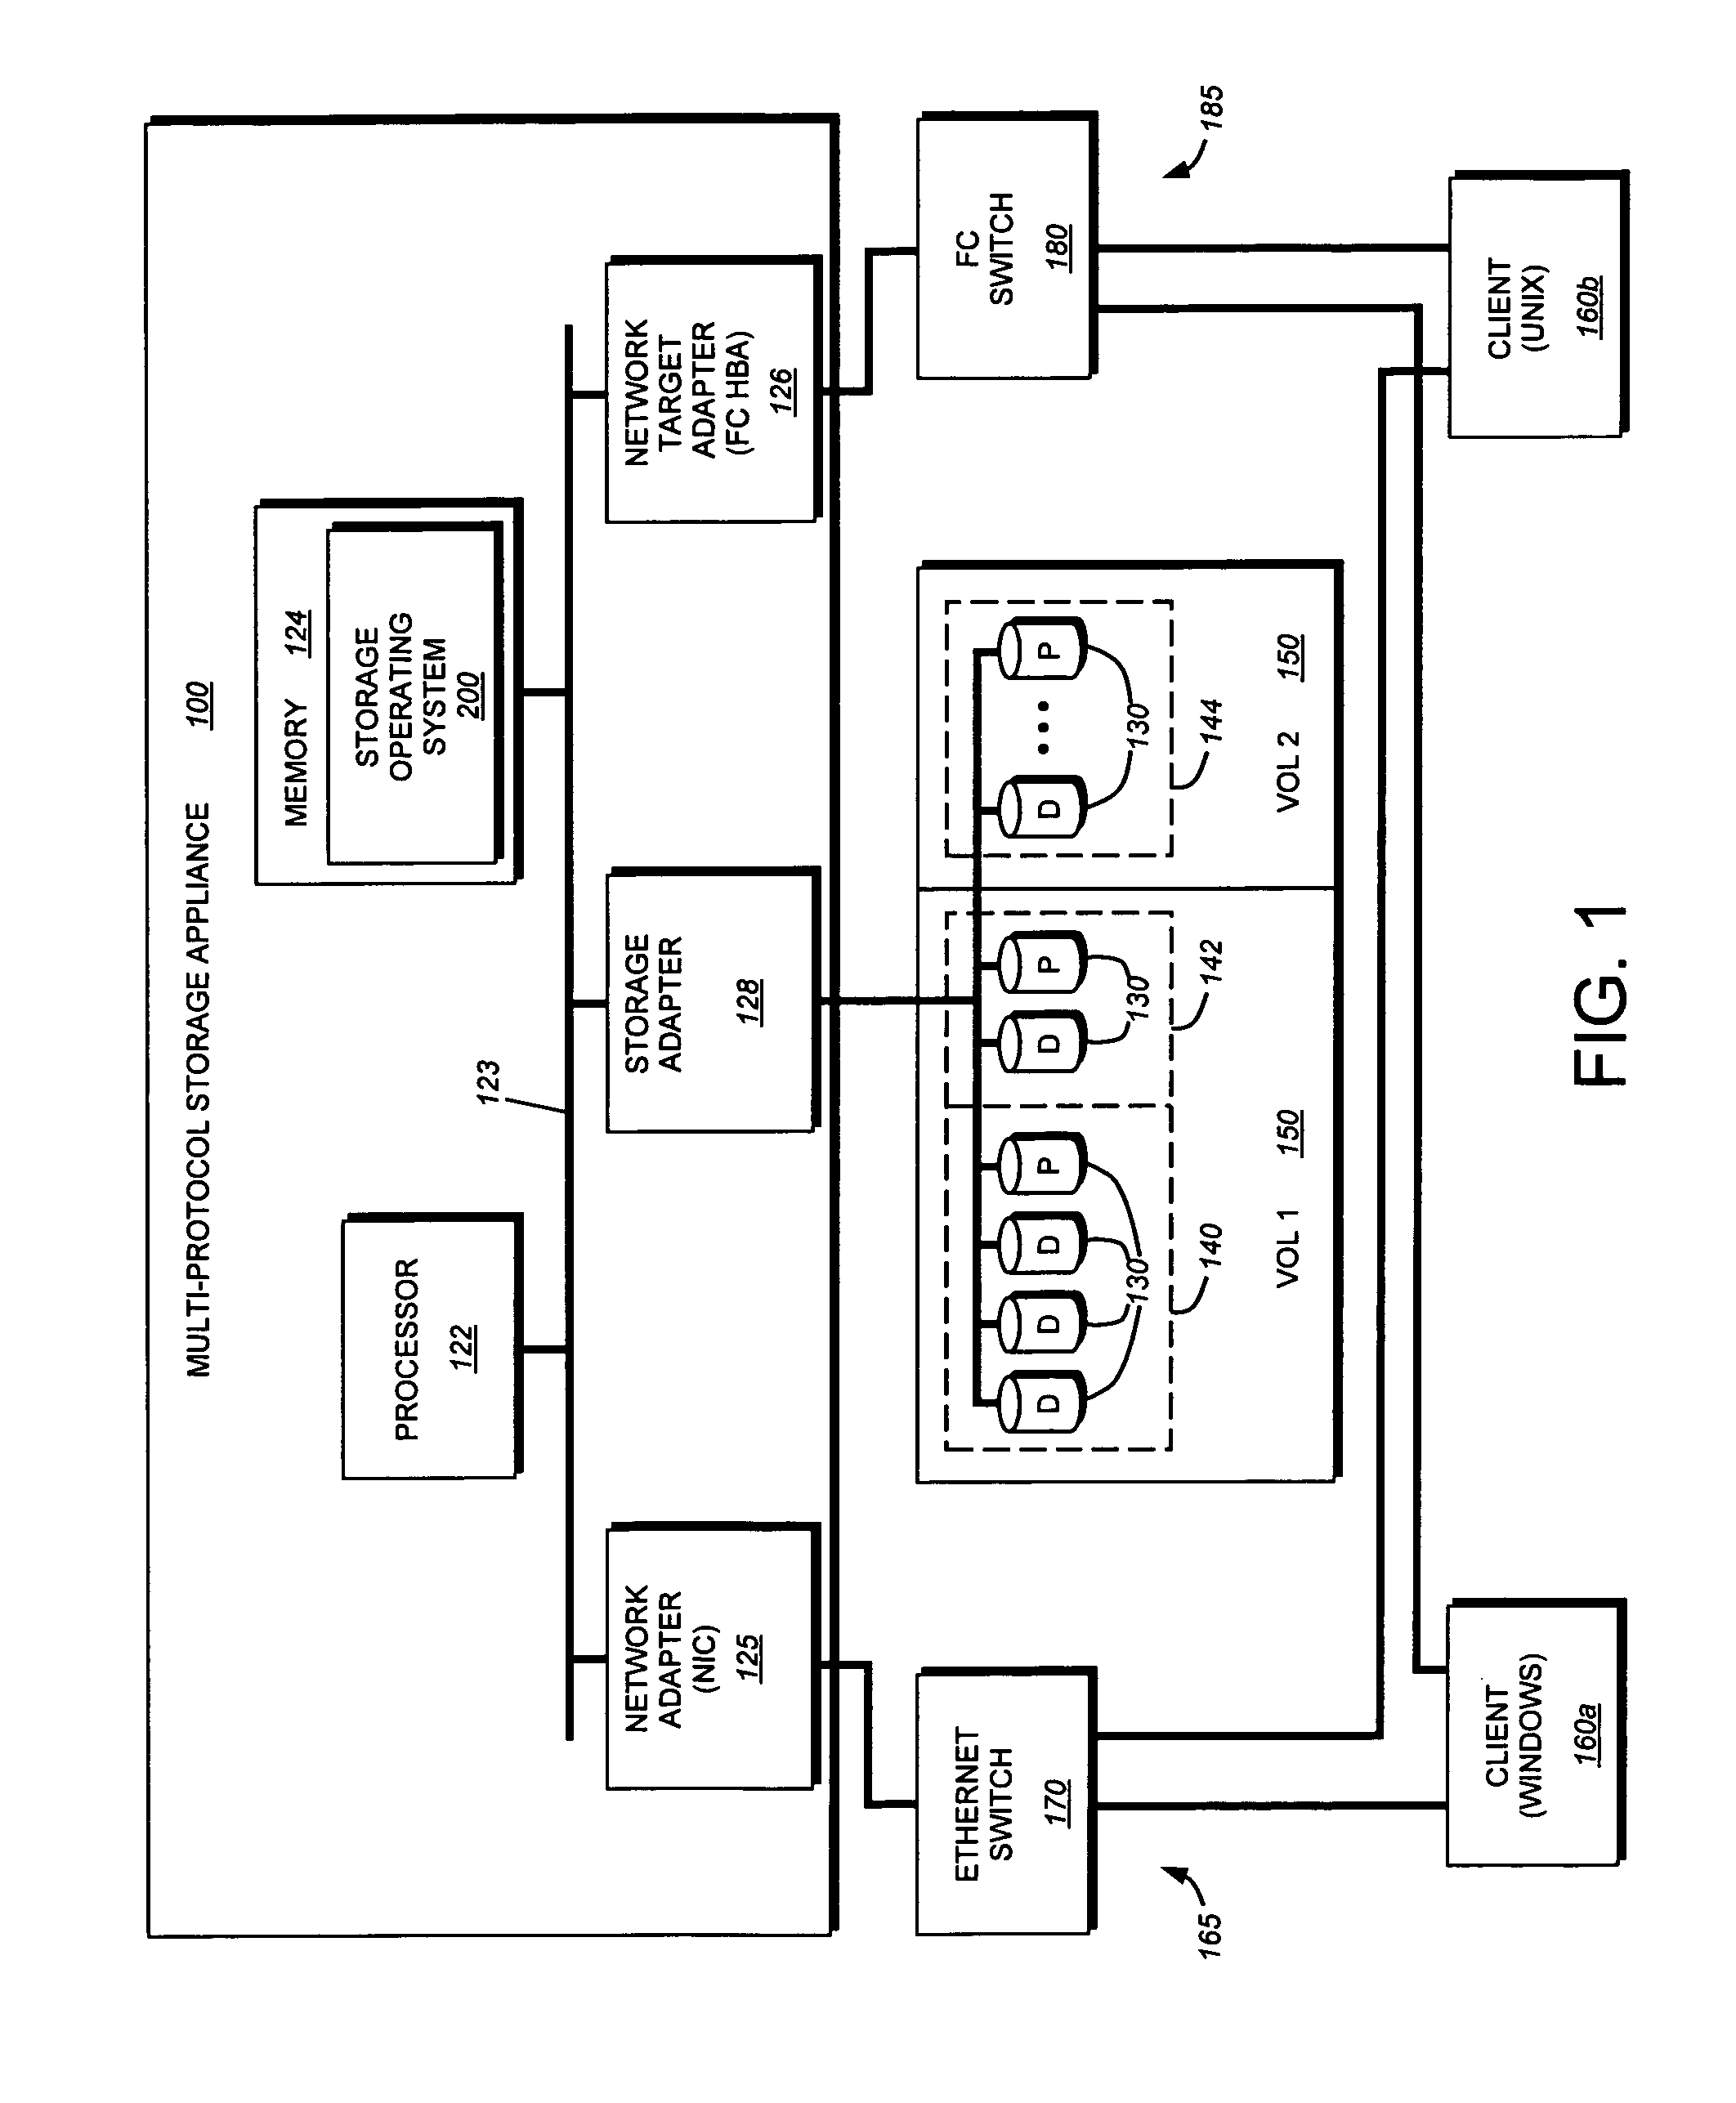 System and method for inband management of a virtual disk